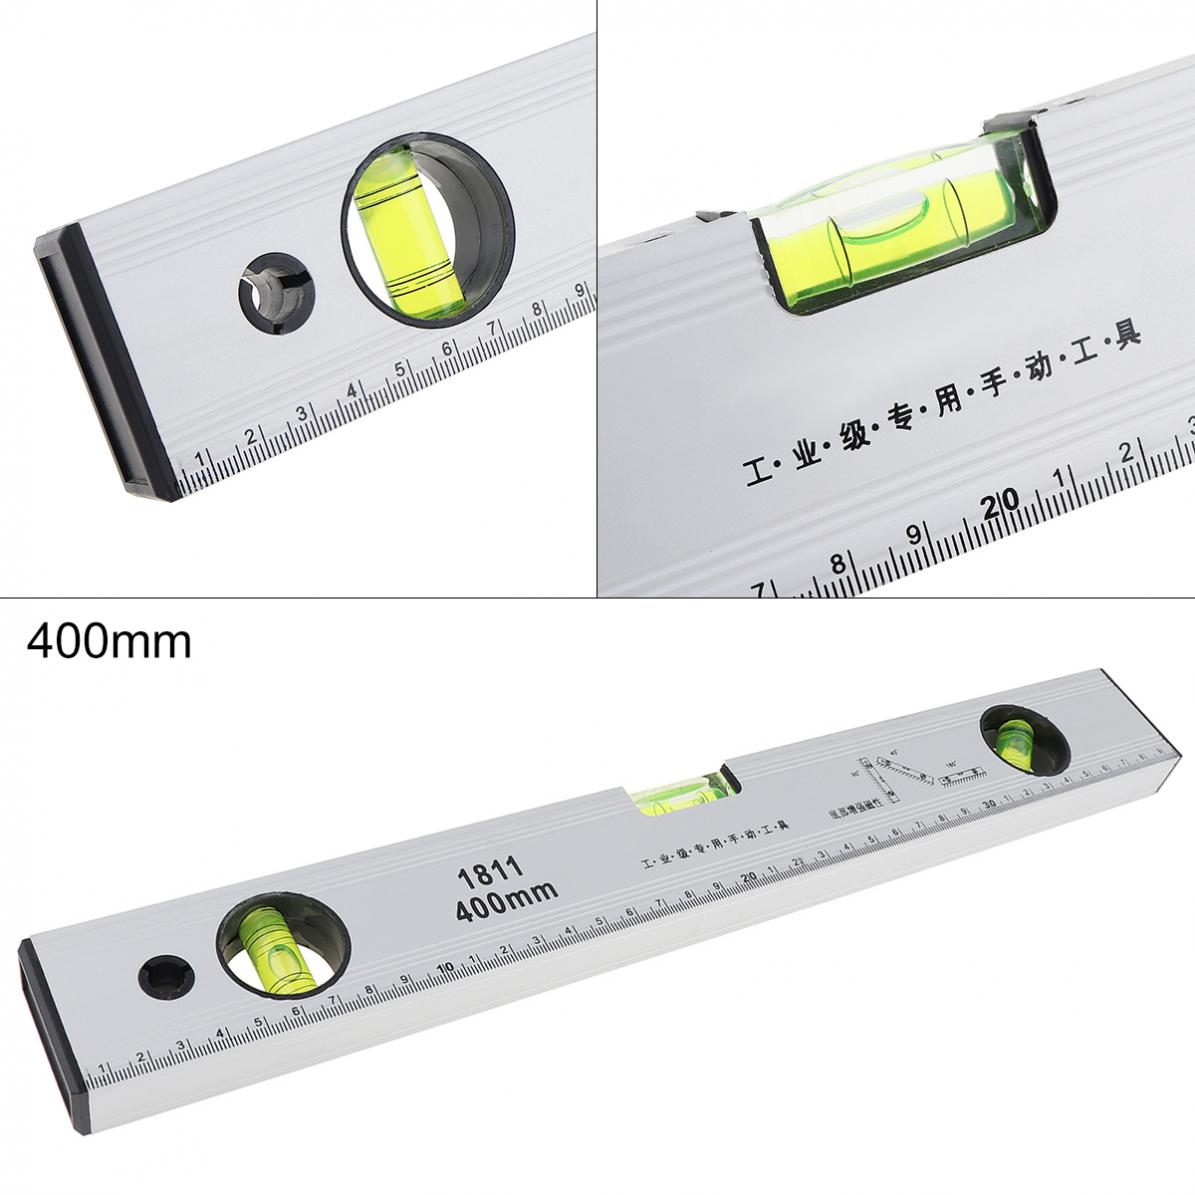 spirit level with measure